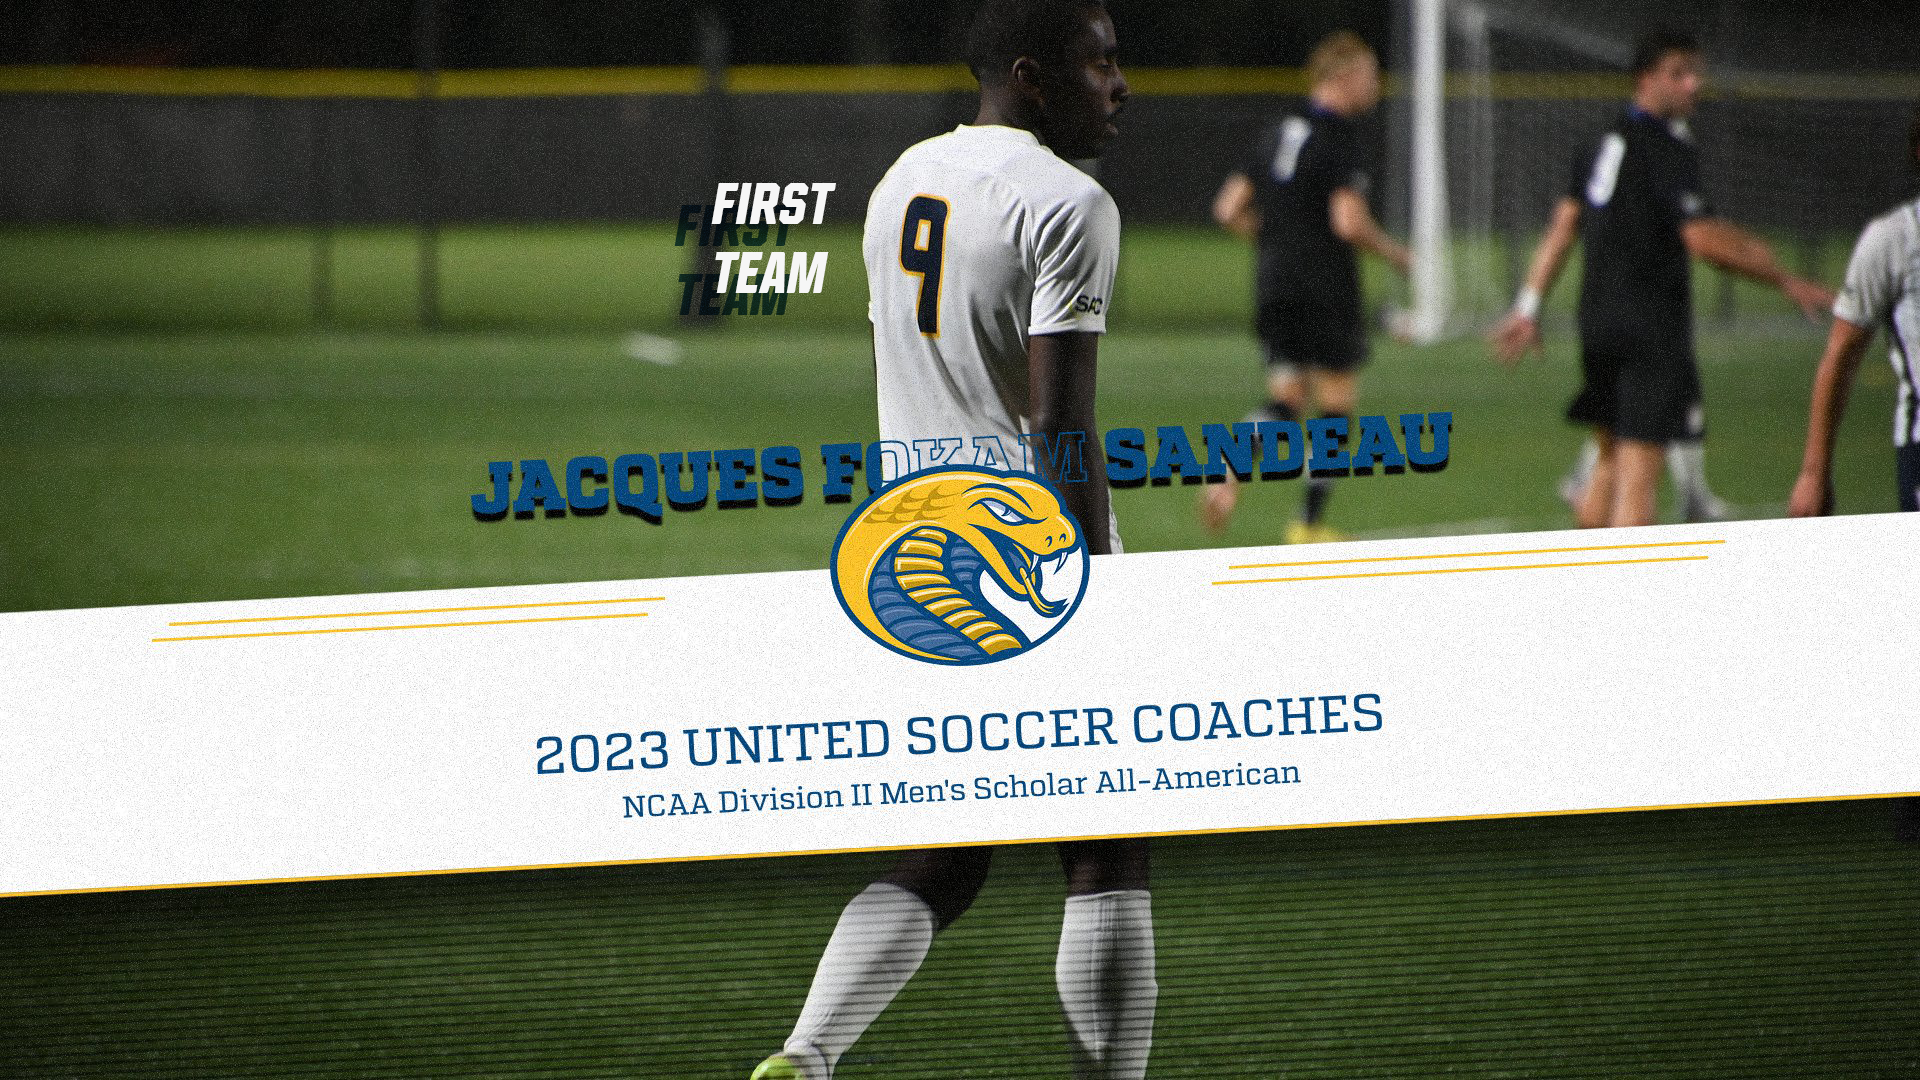 Fokam Sandeau Named First Team United Soccer Coaches NCAA Division II Men's Scholar All-American